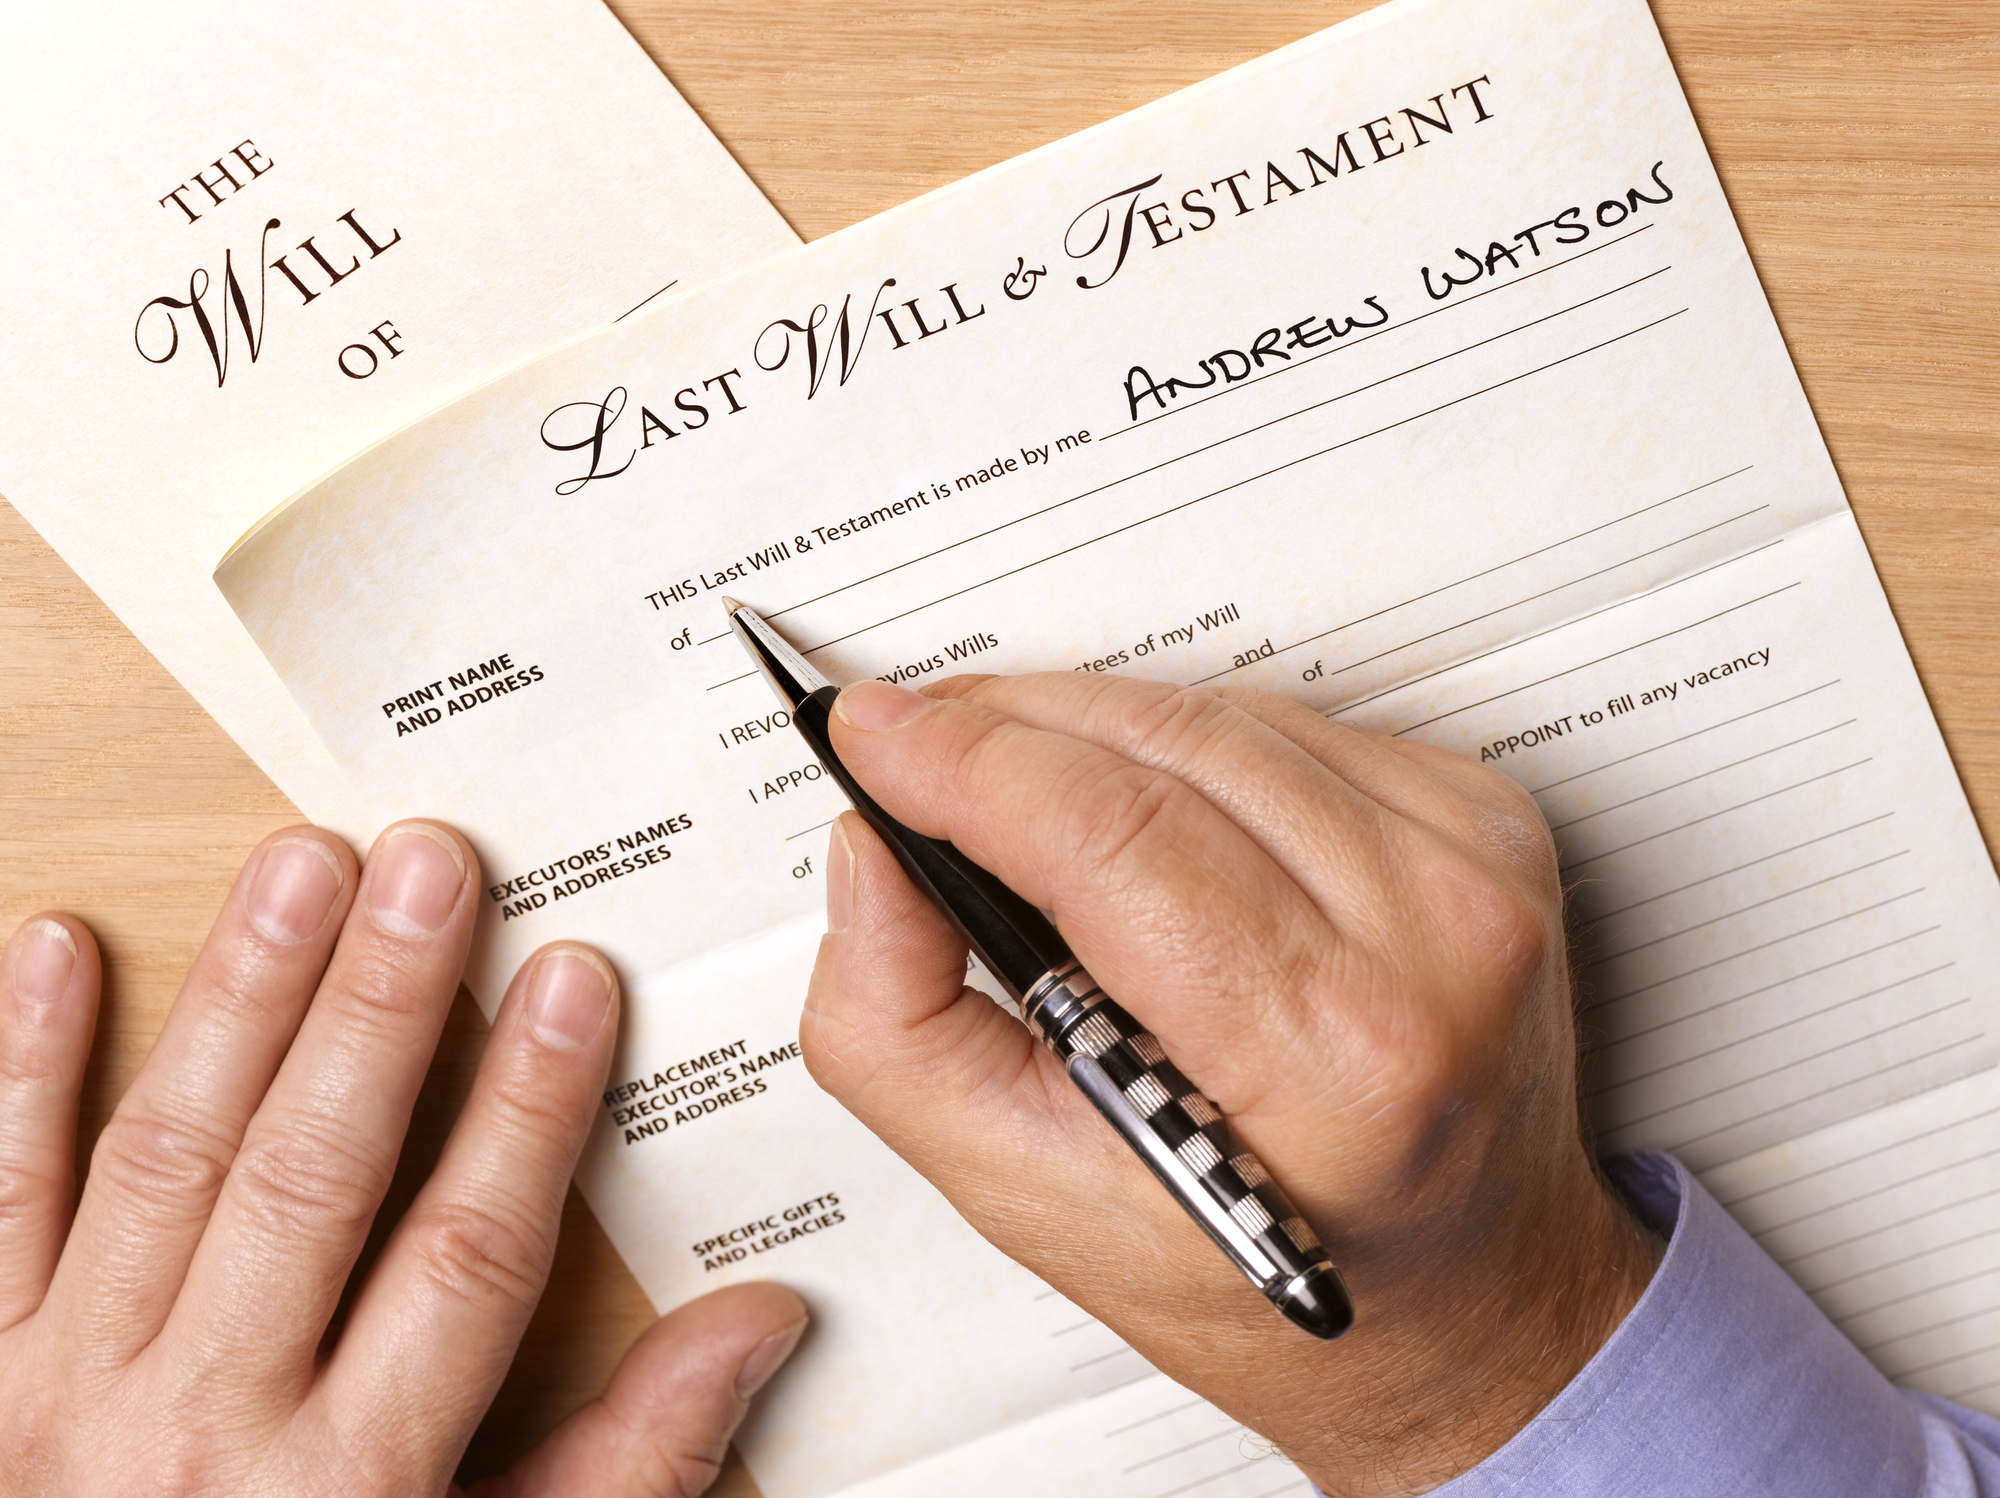 Last will and testament | Getty Images